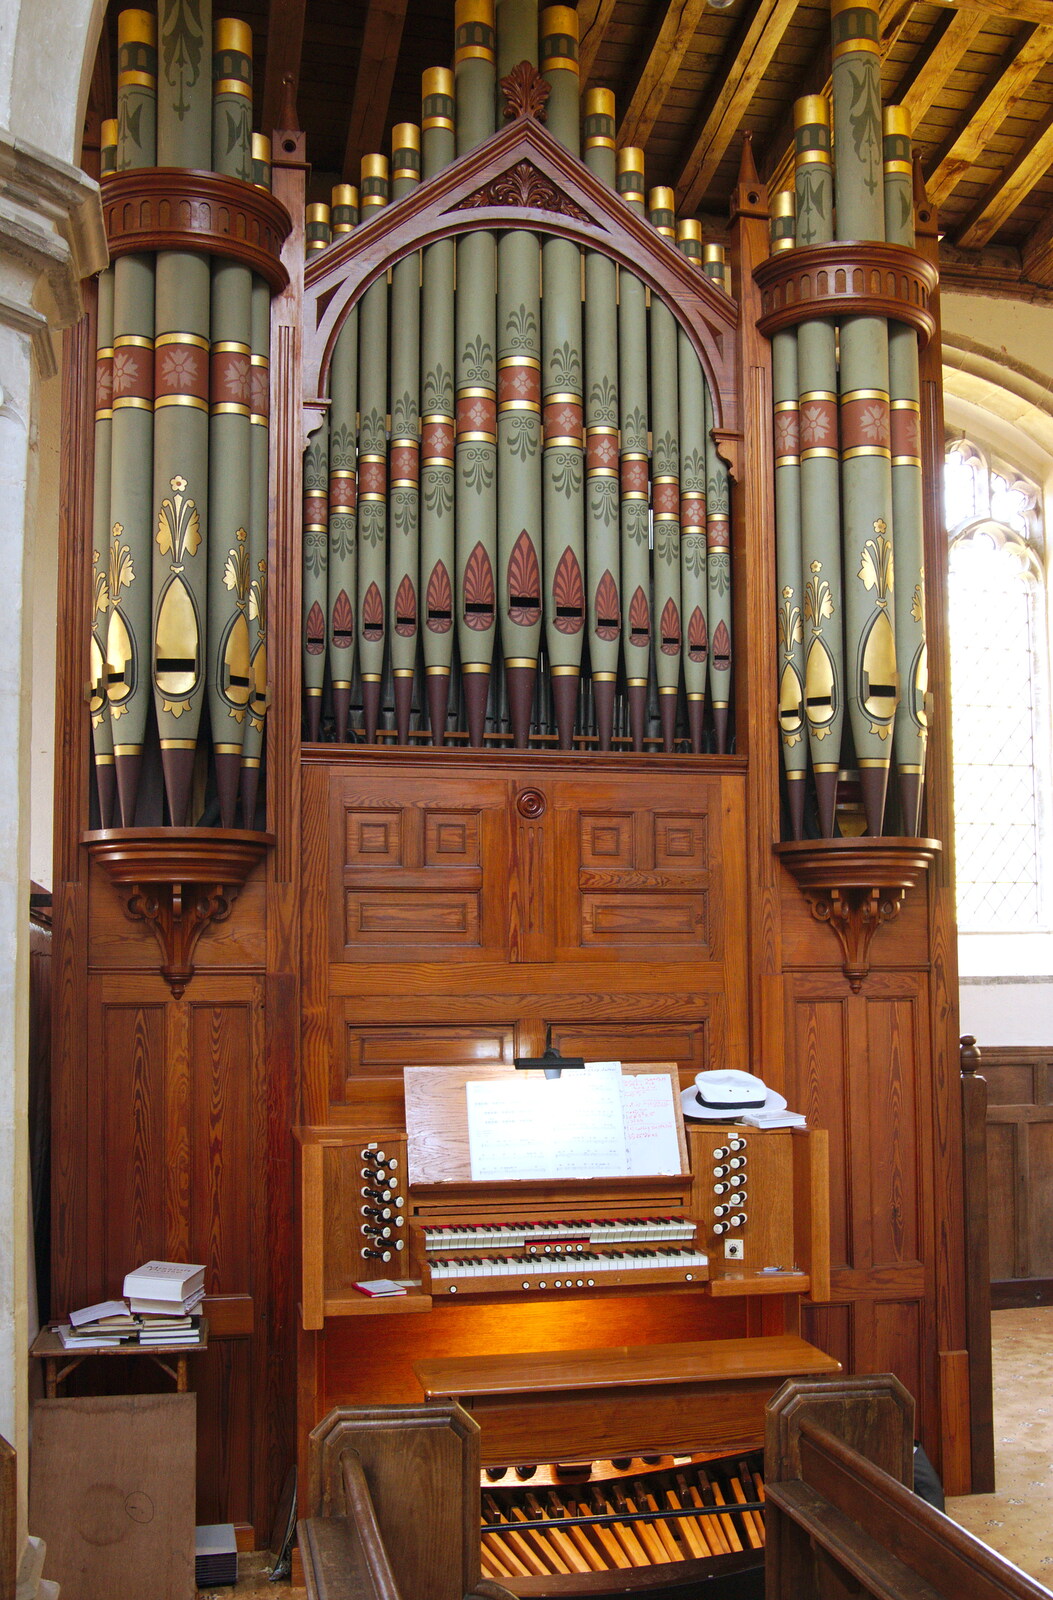 The church has a nice organ from The Gislingham Silver Band at Walsham Le Willows, Suffolk - 26th August 2019